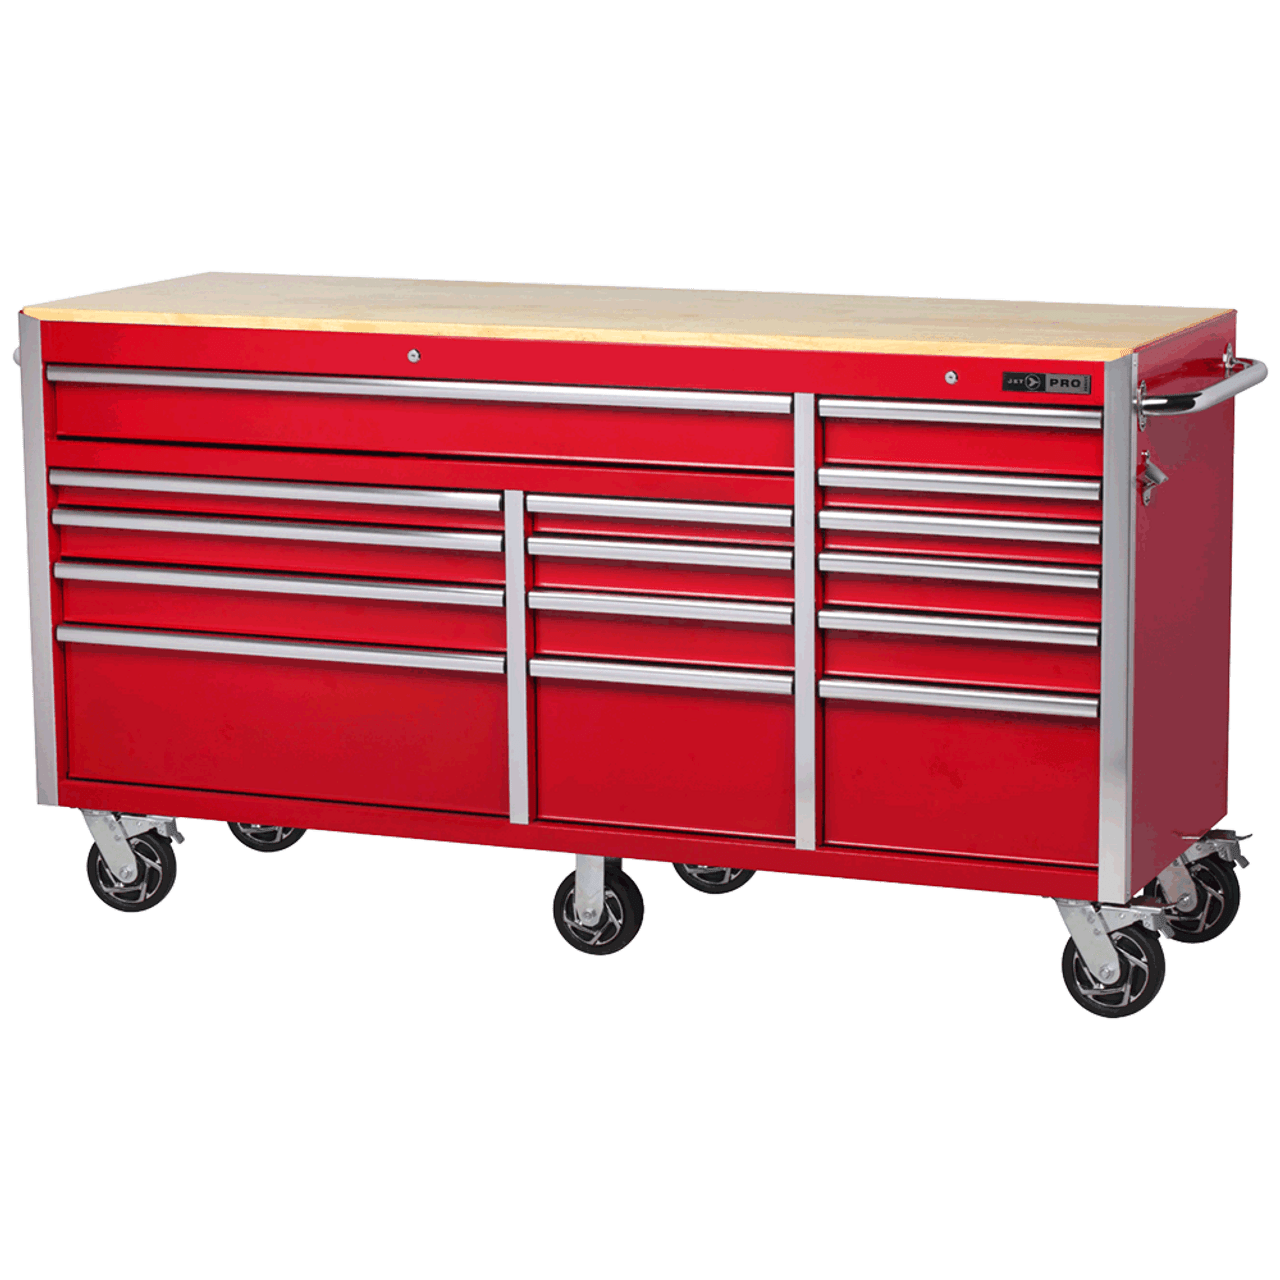 72 x 24" Pro Series Roller Cabinet - 15 Drawers  842531